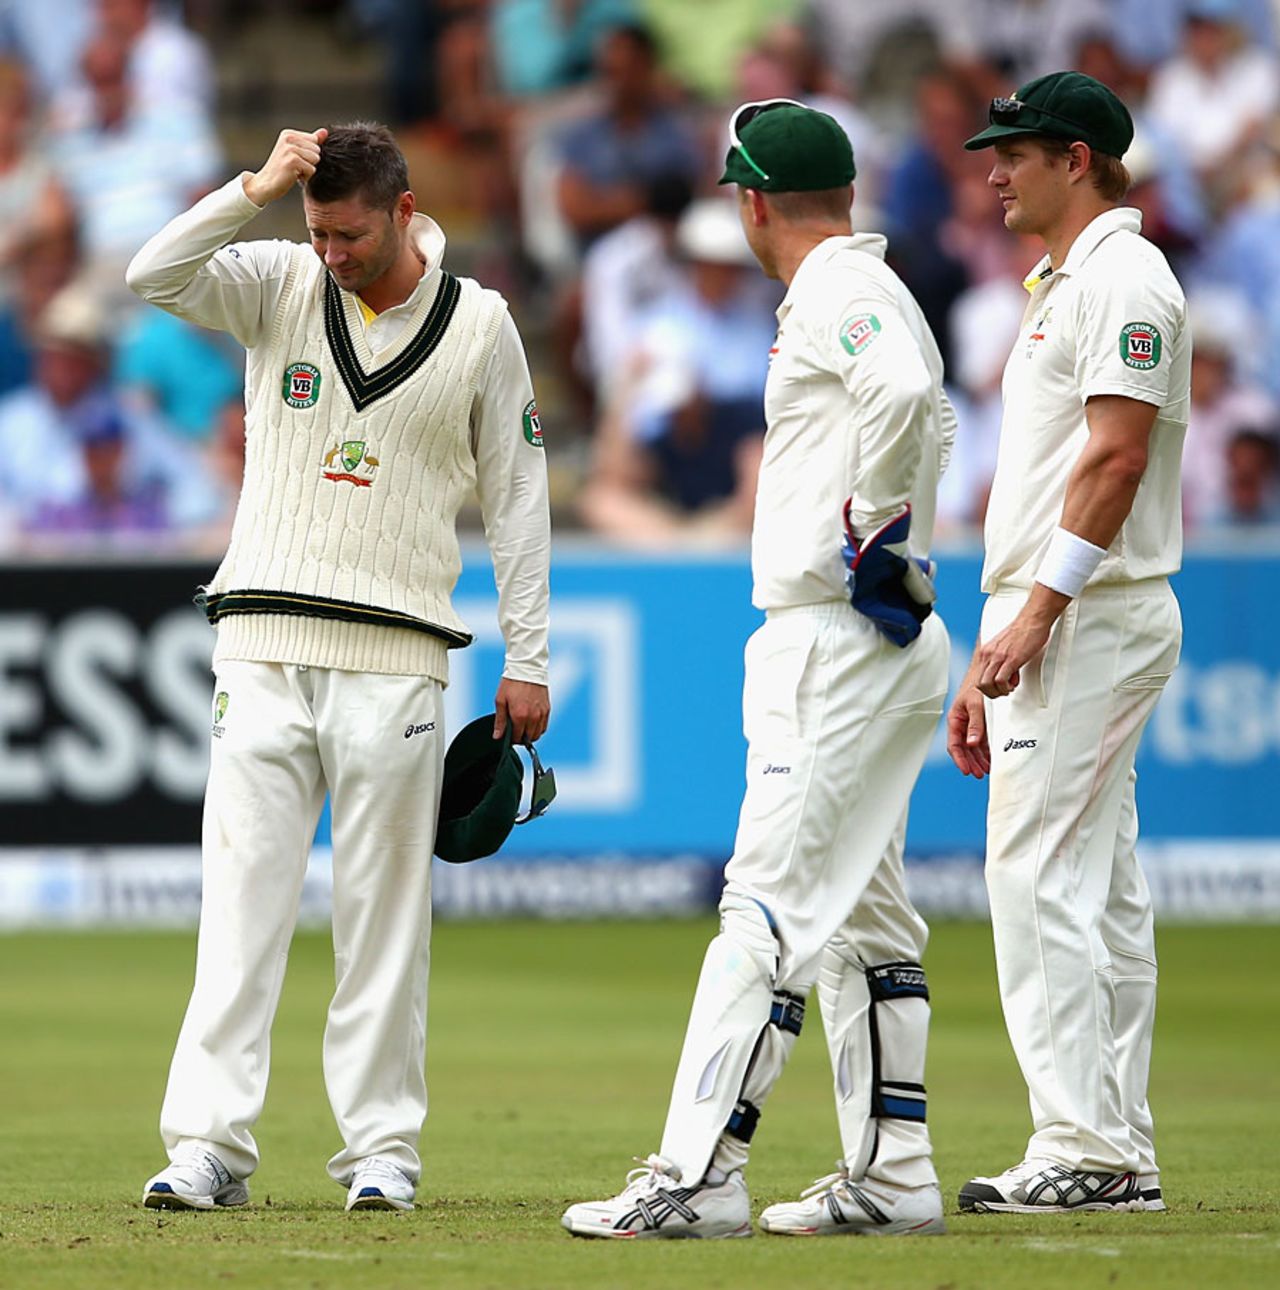 Tough day: Michael Clarke ponders his options, England v Australia, 2nd Investec Test, Lord's, 3rd day, July 20, 2013